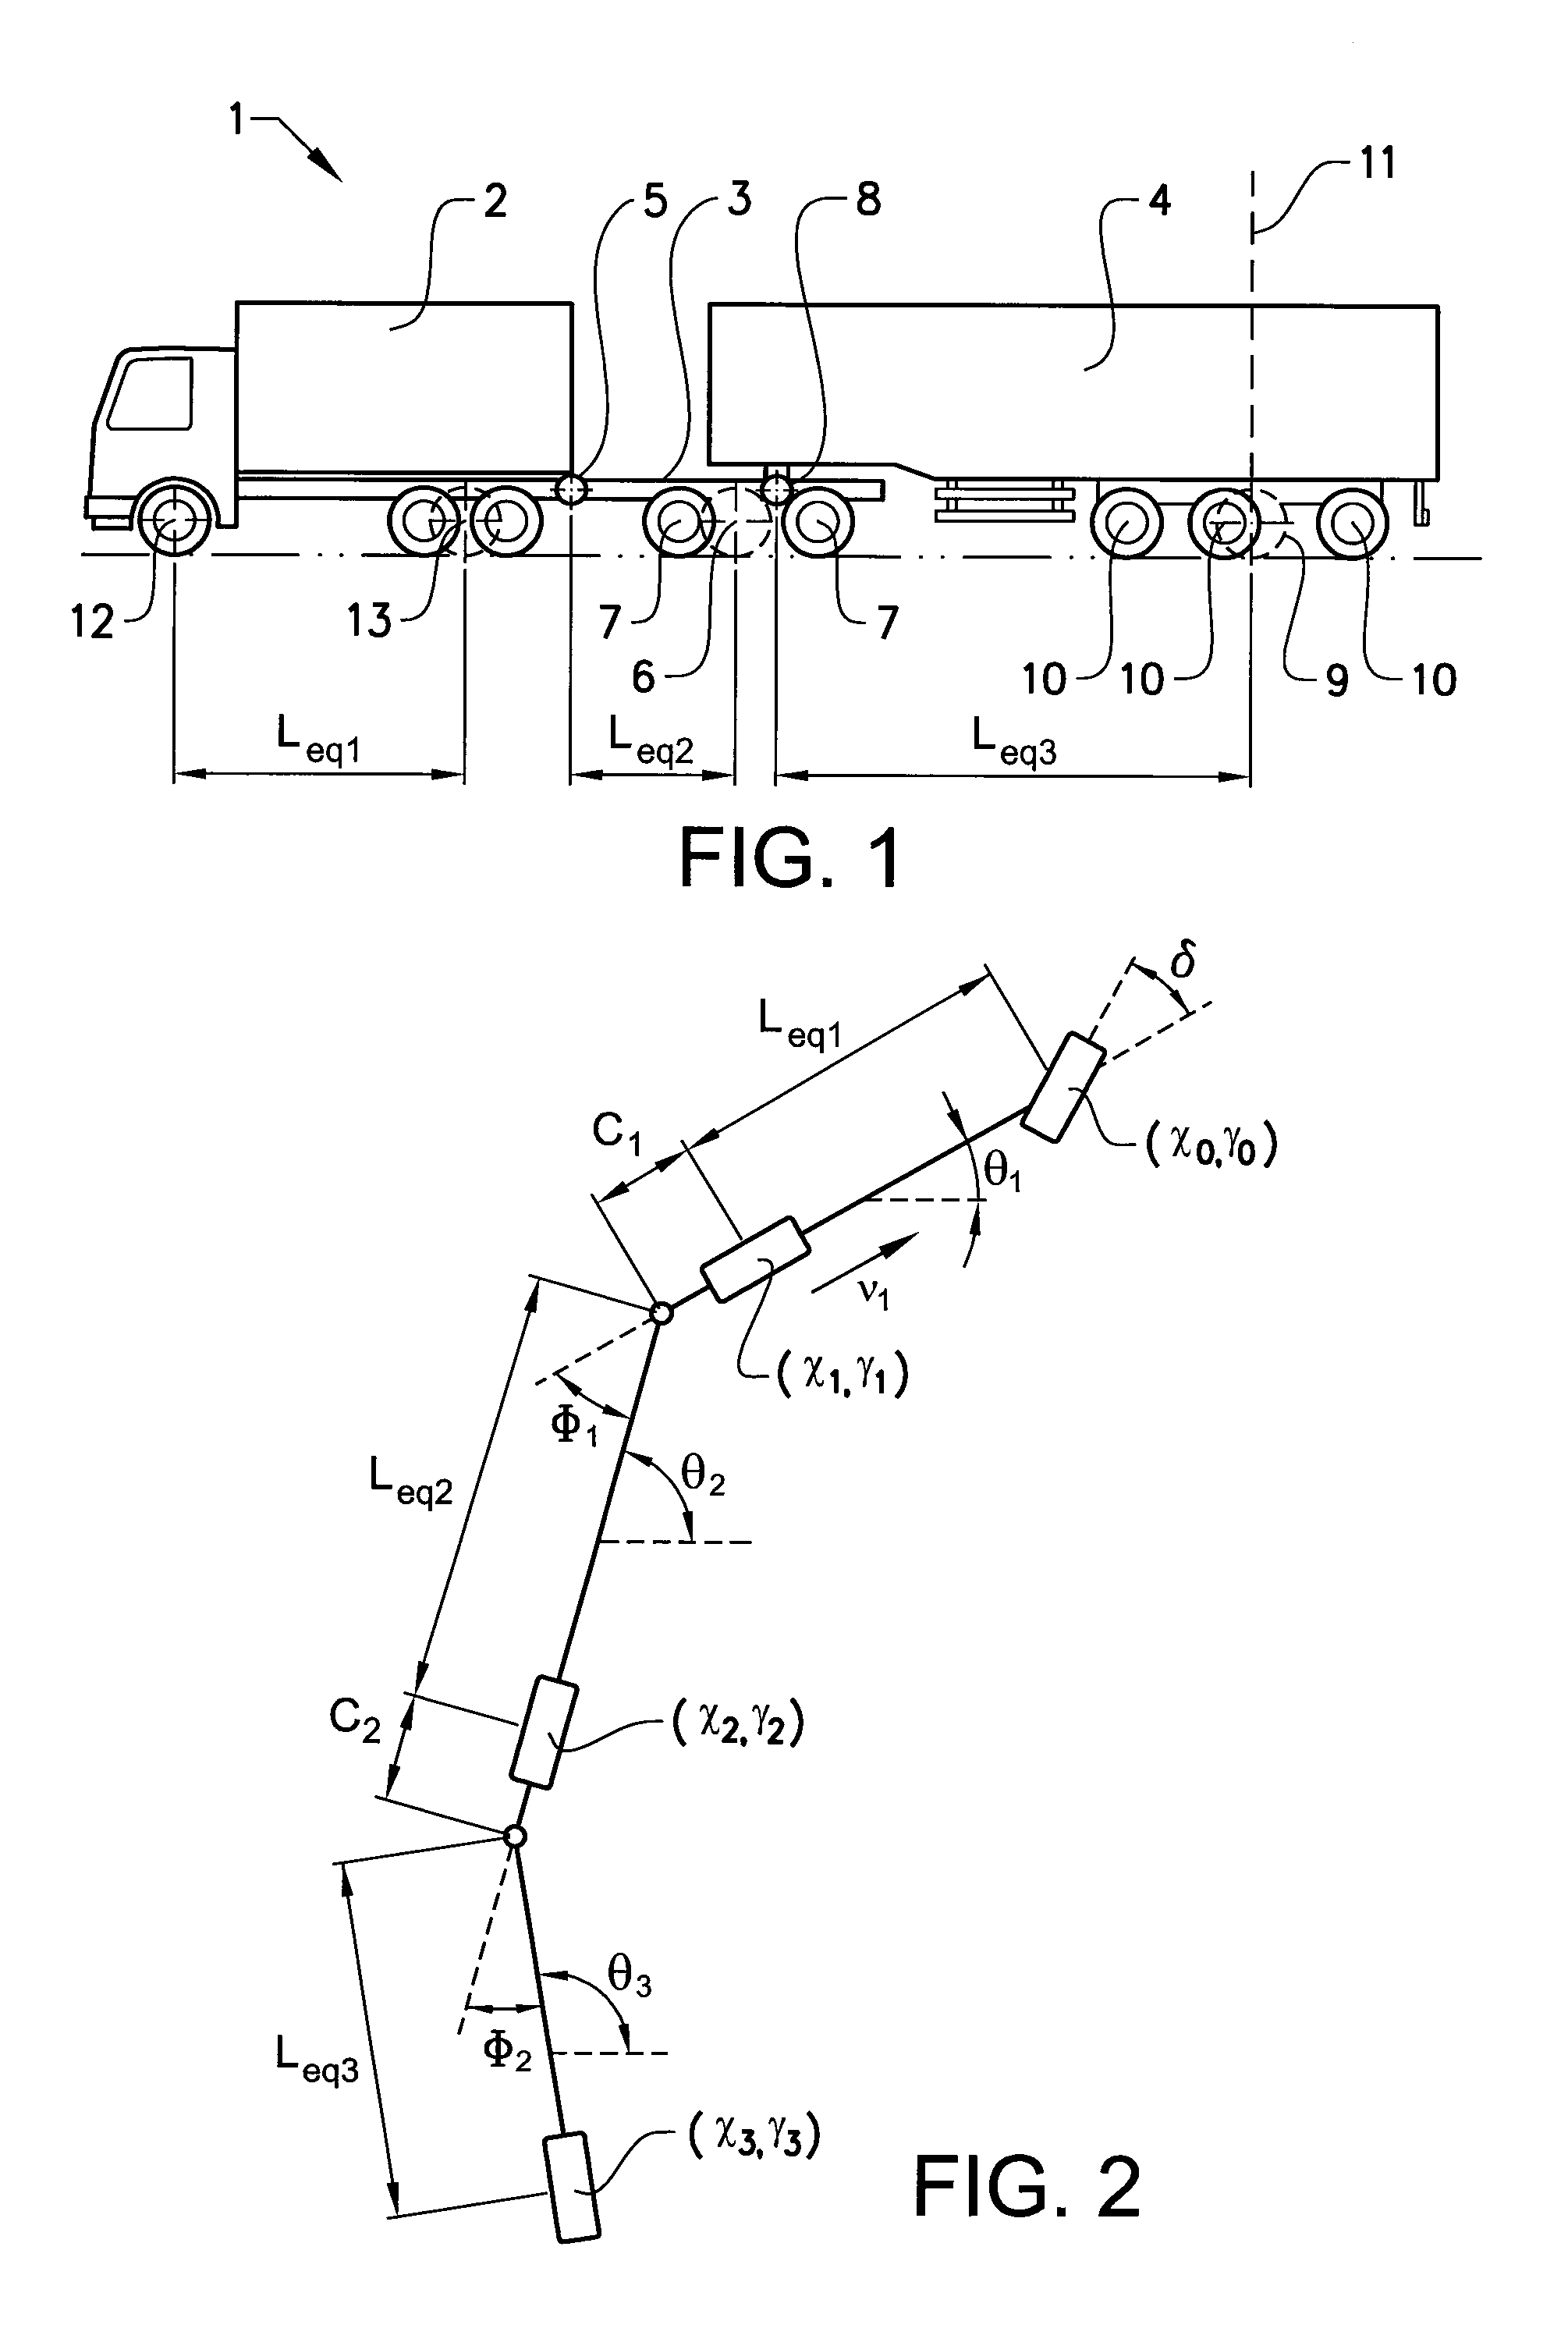 Method for assisting the reversal of an articulated vehicle